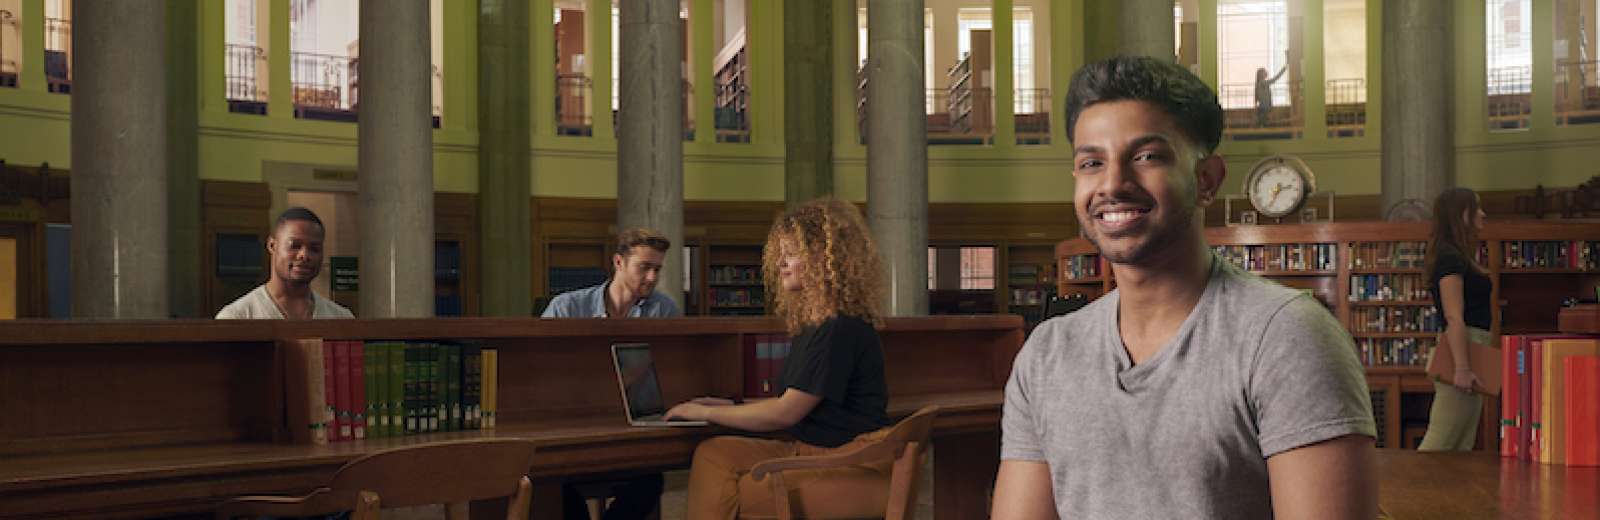 A male student sits in the Brotherton Library and smiles towards the camera. In the background other students can be seen working in the library.